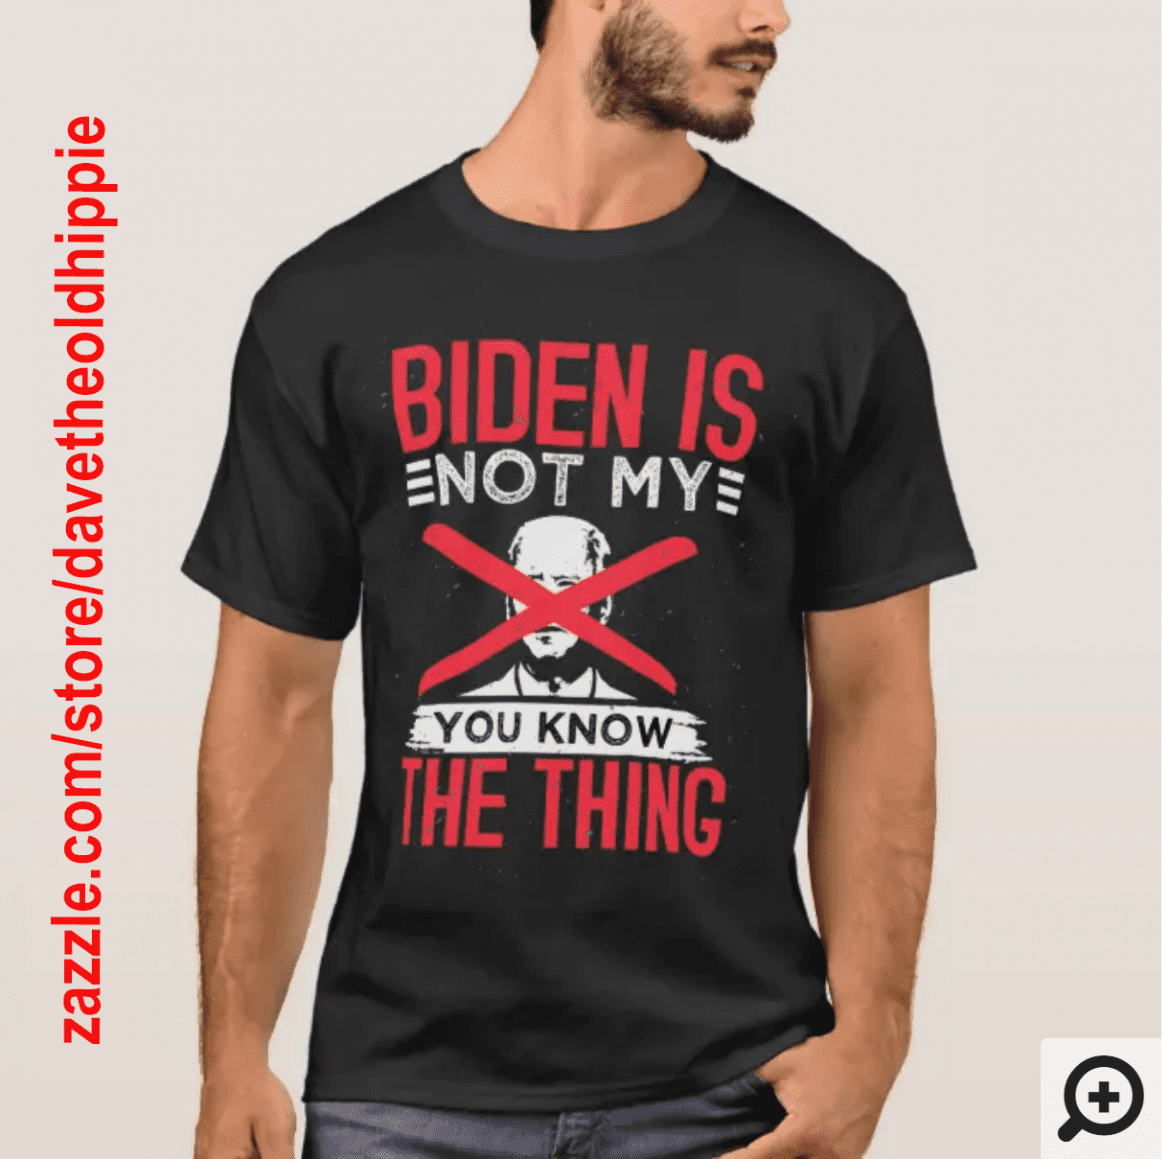 Biden Not My – You Know The Thing